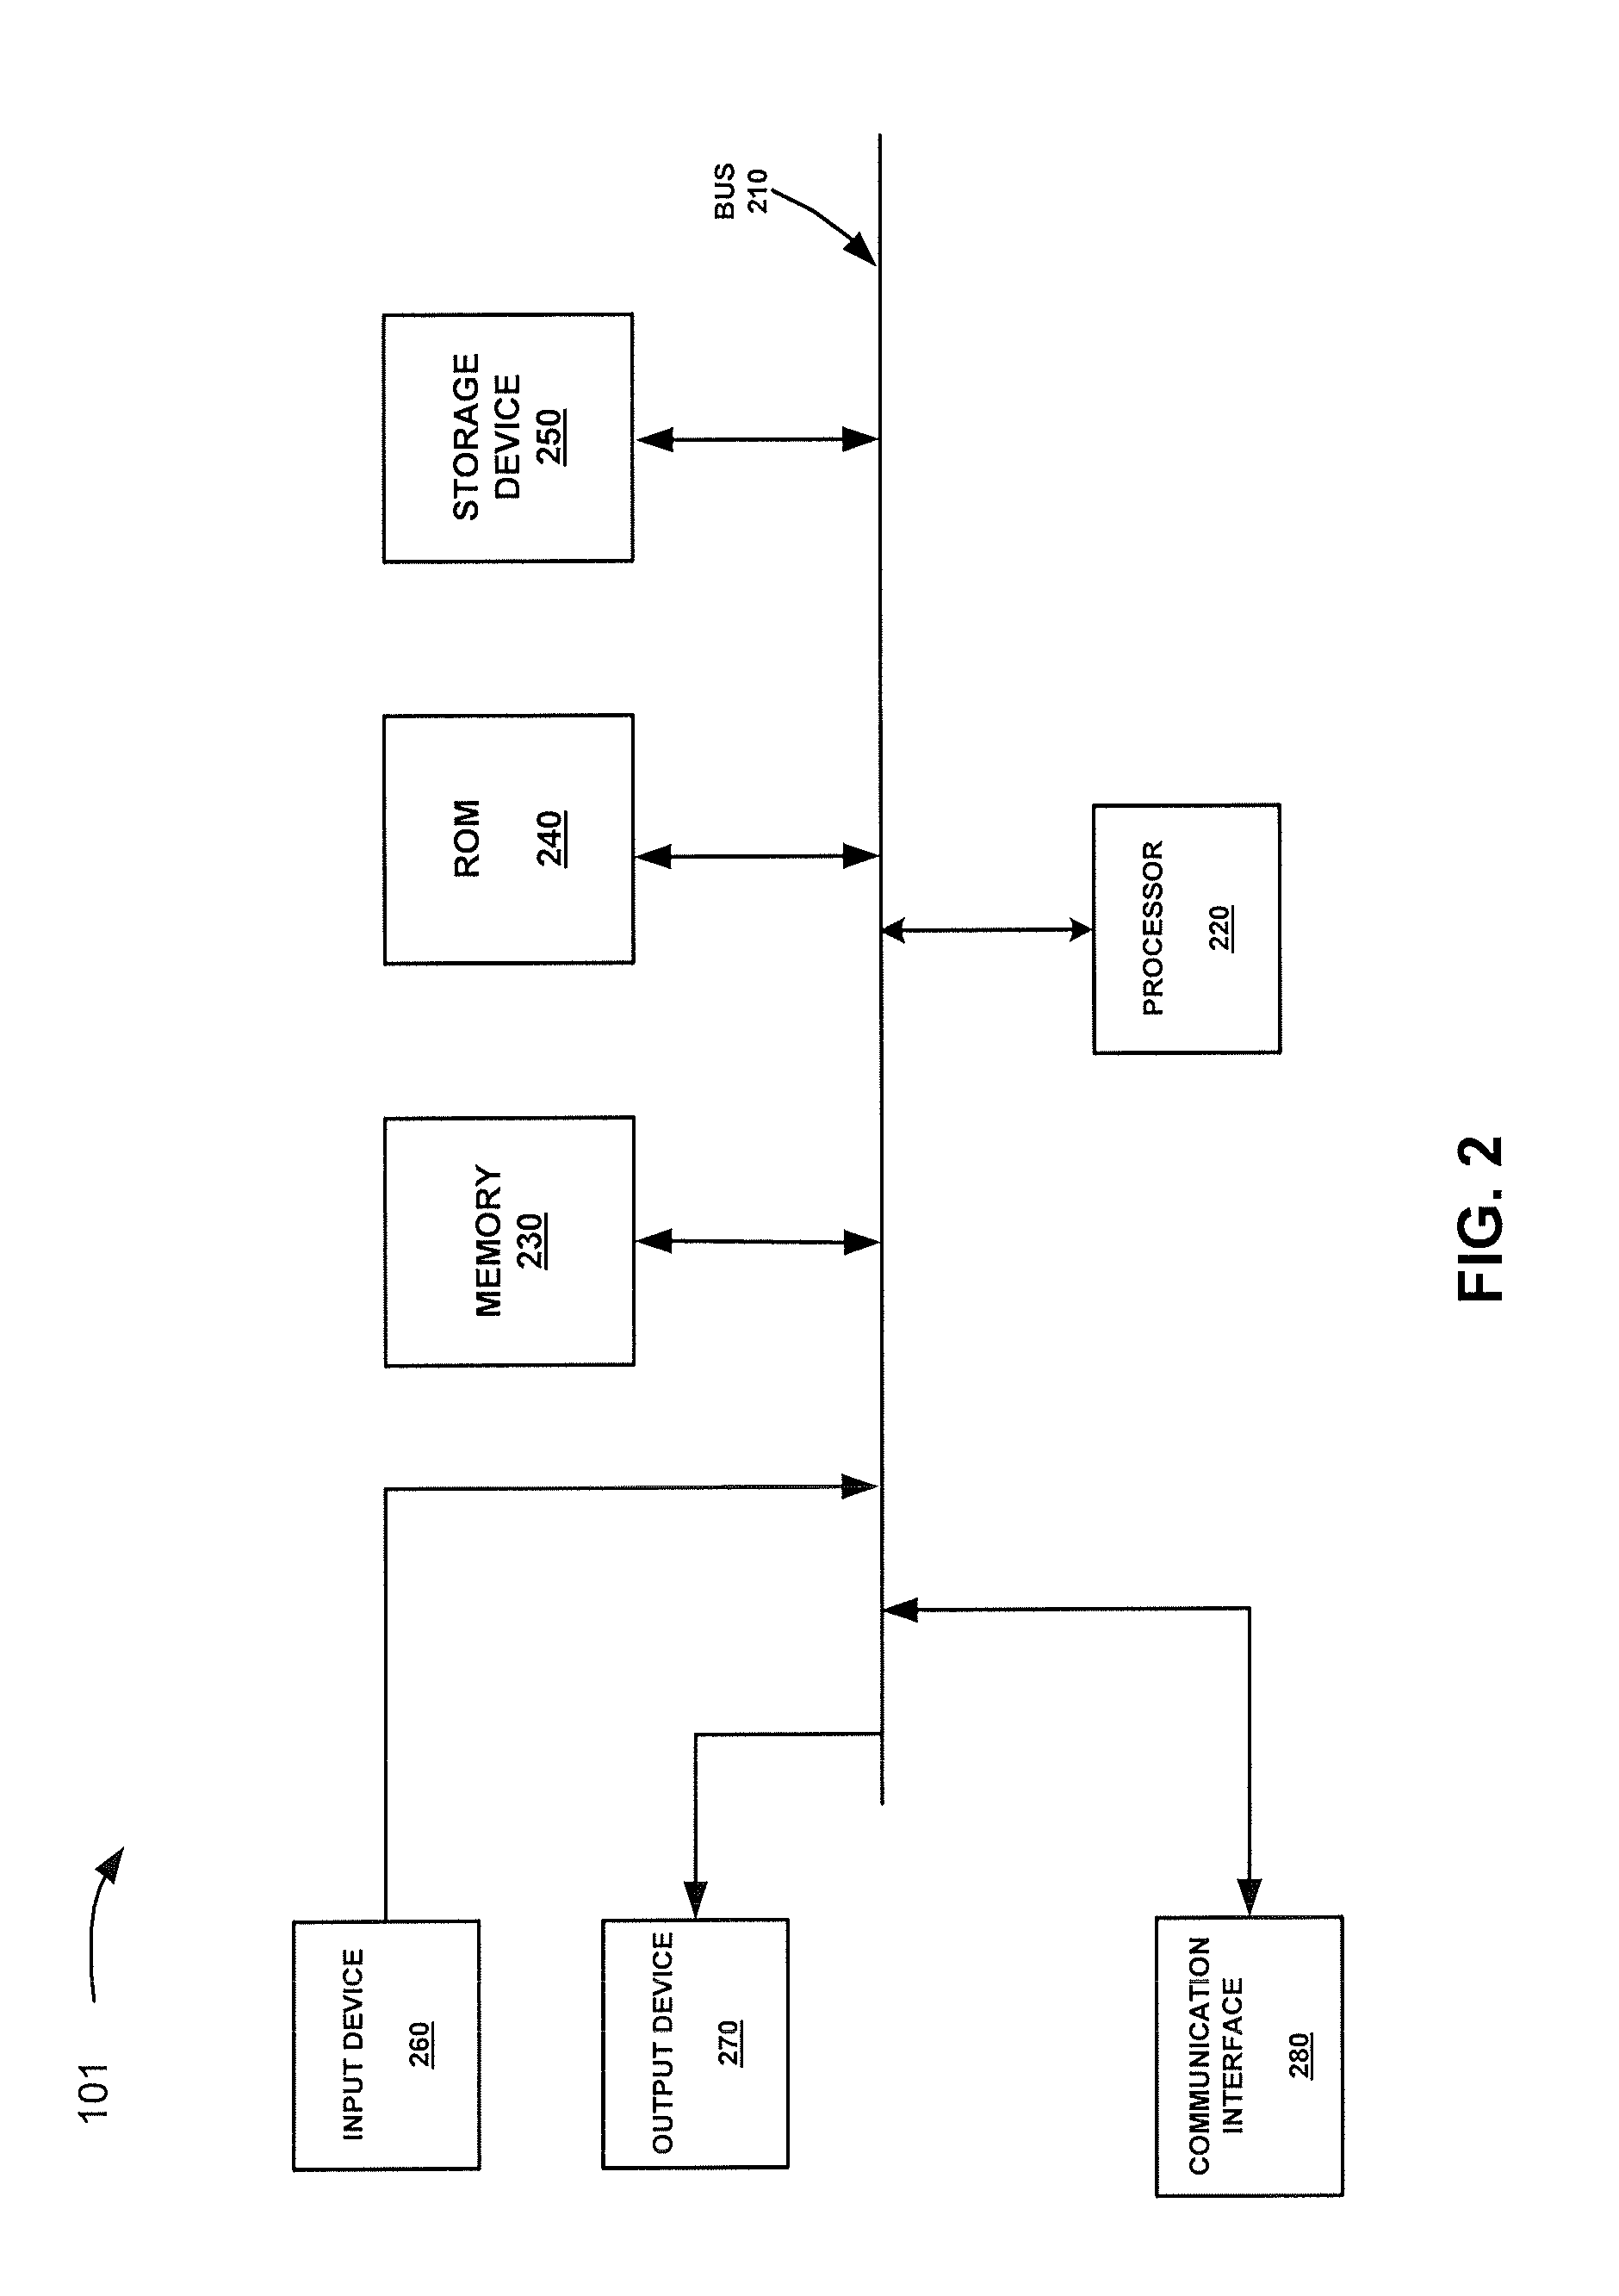 System and method for generating and sending a simplified message using speech recognition